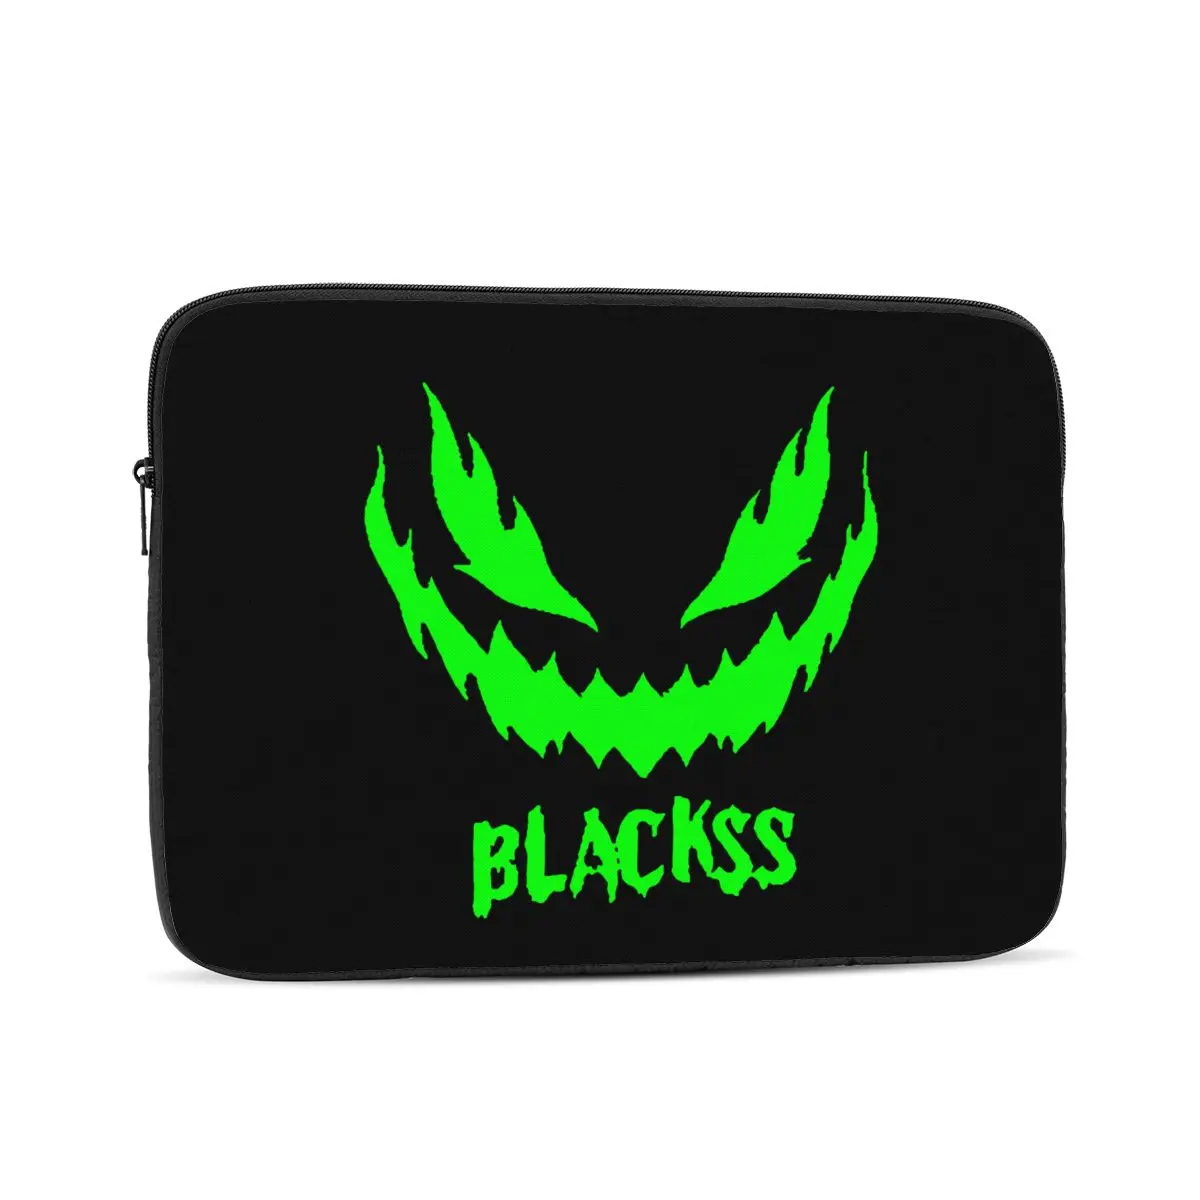 

Devil Blackss Laptop Sleeves for 10in 12in 13in 15in 17in Laptop Bags Protective Pouch Notebook Computer Sleeves Tablet Case